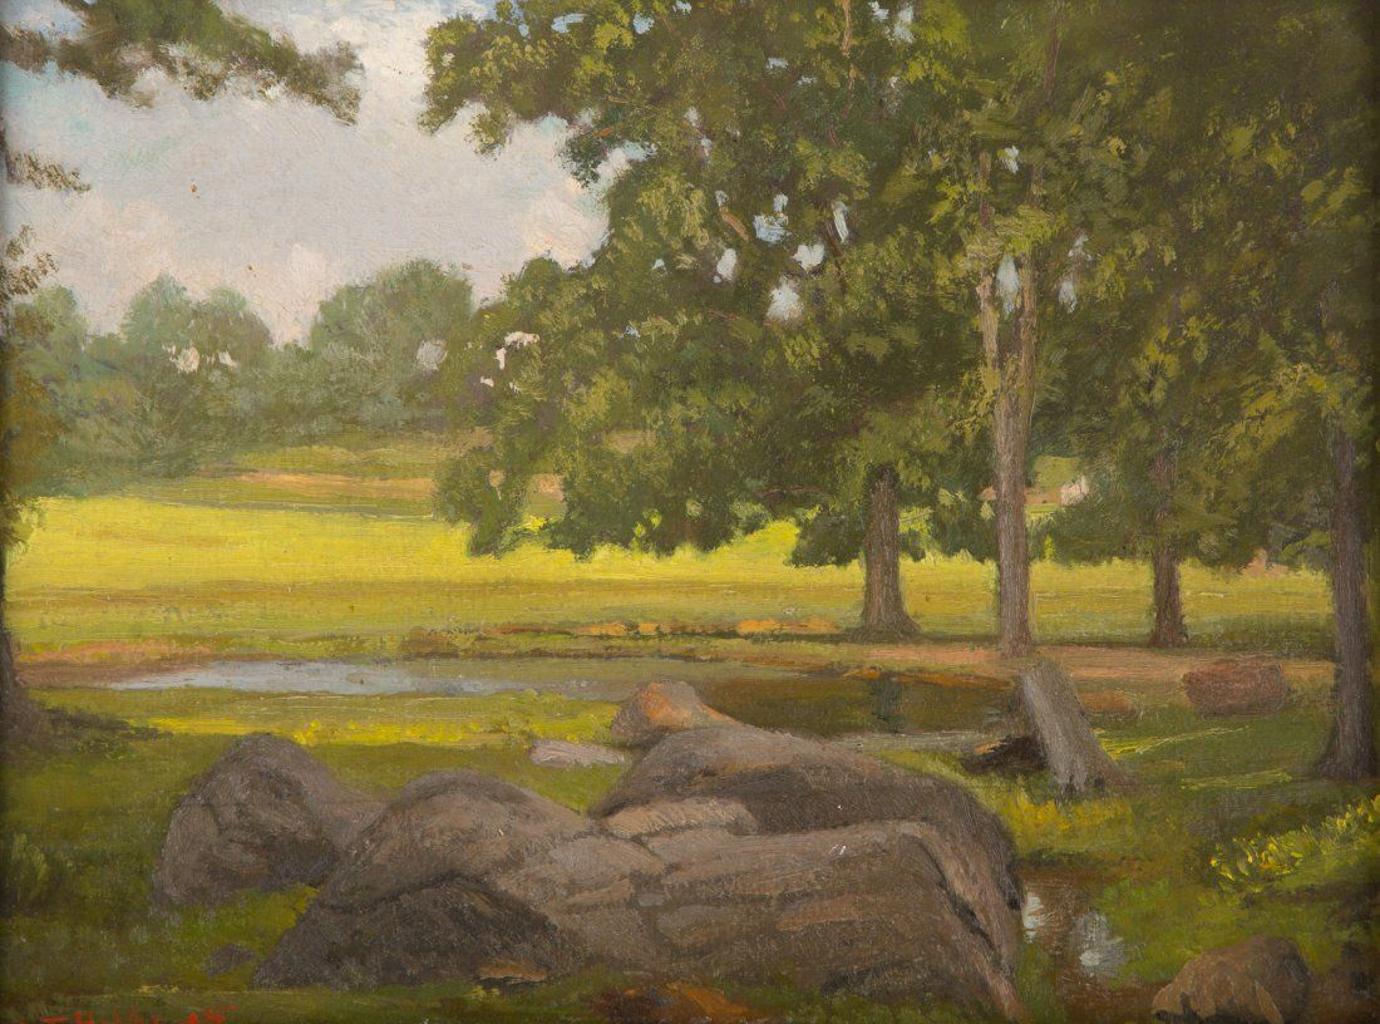 Title: Summer 
Medium: Oil On Board
Painting Size: 9 x 12inches
Frame Size: 12 x 15inches
Condition: This artwork is in good overall condition for its age.
Signature: Signed
Artist: George Thompson Hobbs (1846-1929)